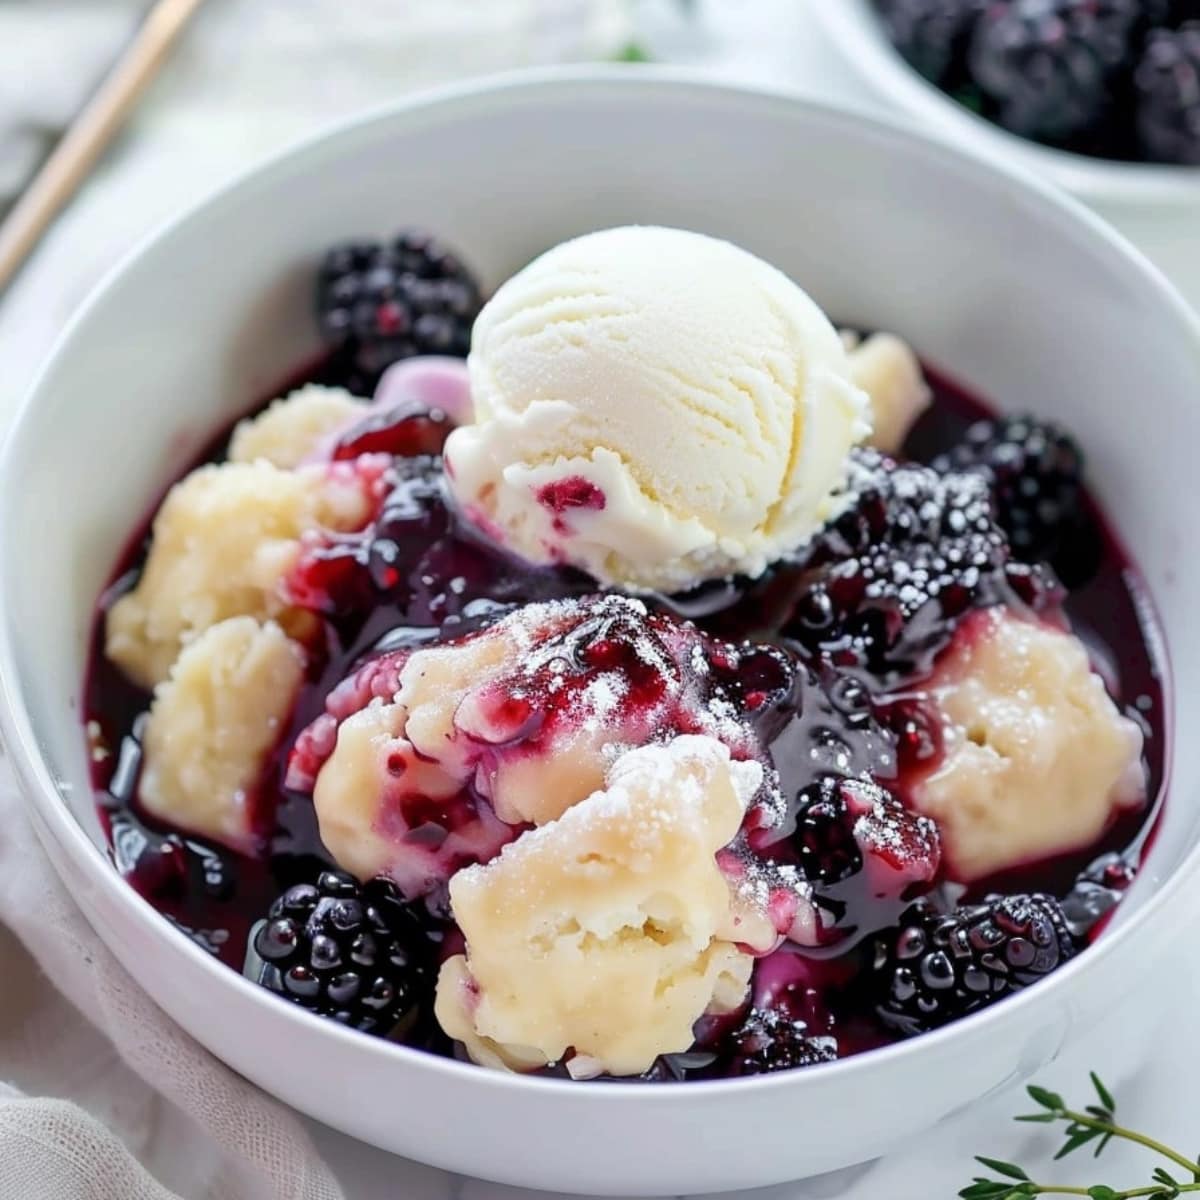 Blackberry dumplings in a white bowl garnished with scoop of vanilla ice cream on top.